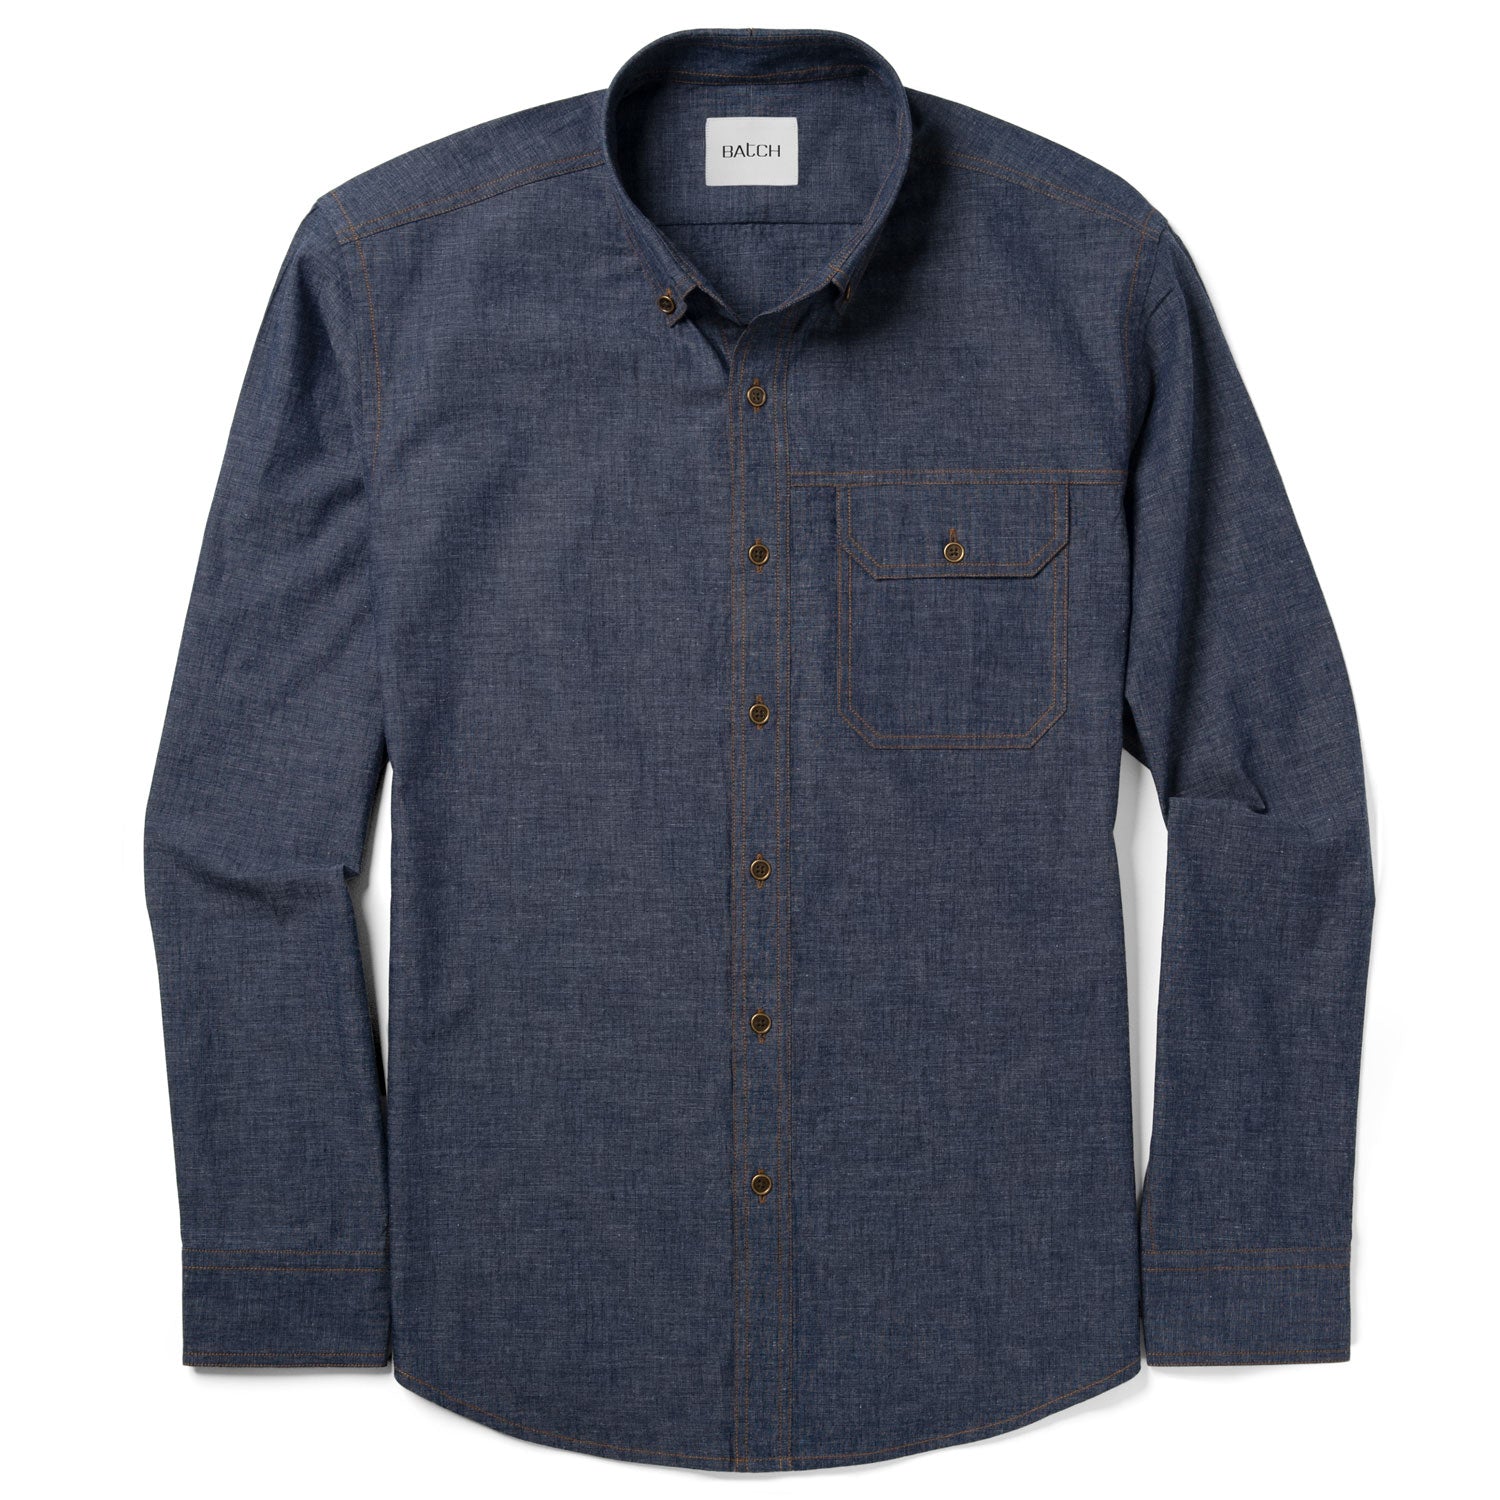 Builder Casual Shirt – Navy Cotton End-on-end